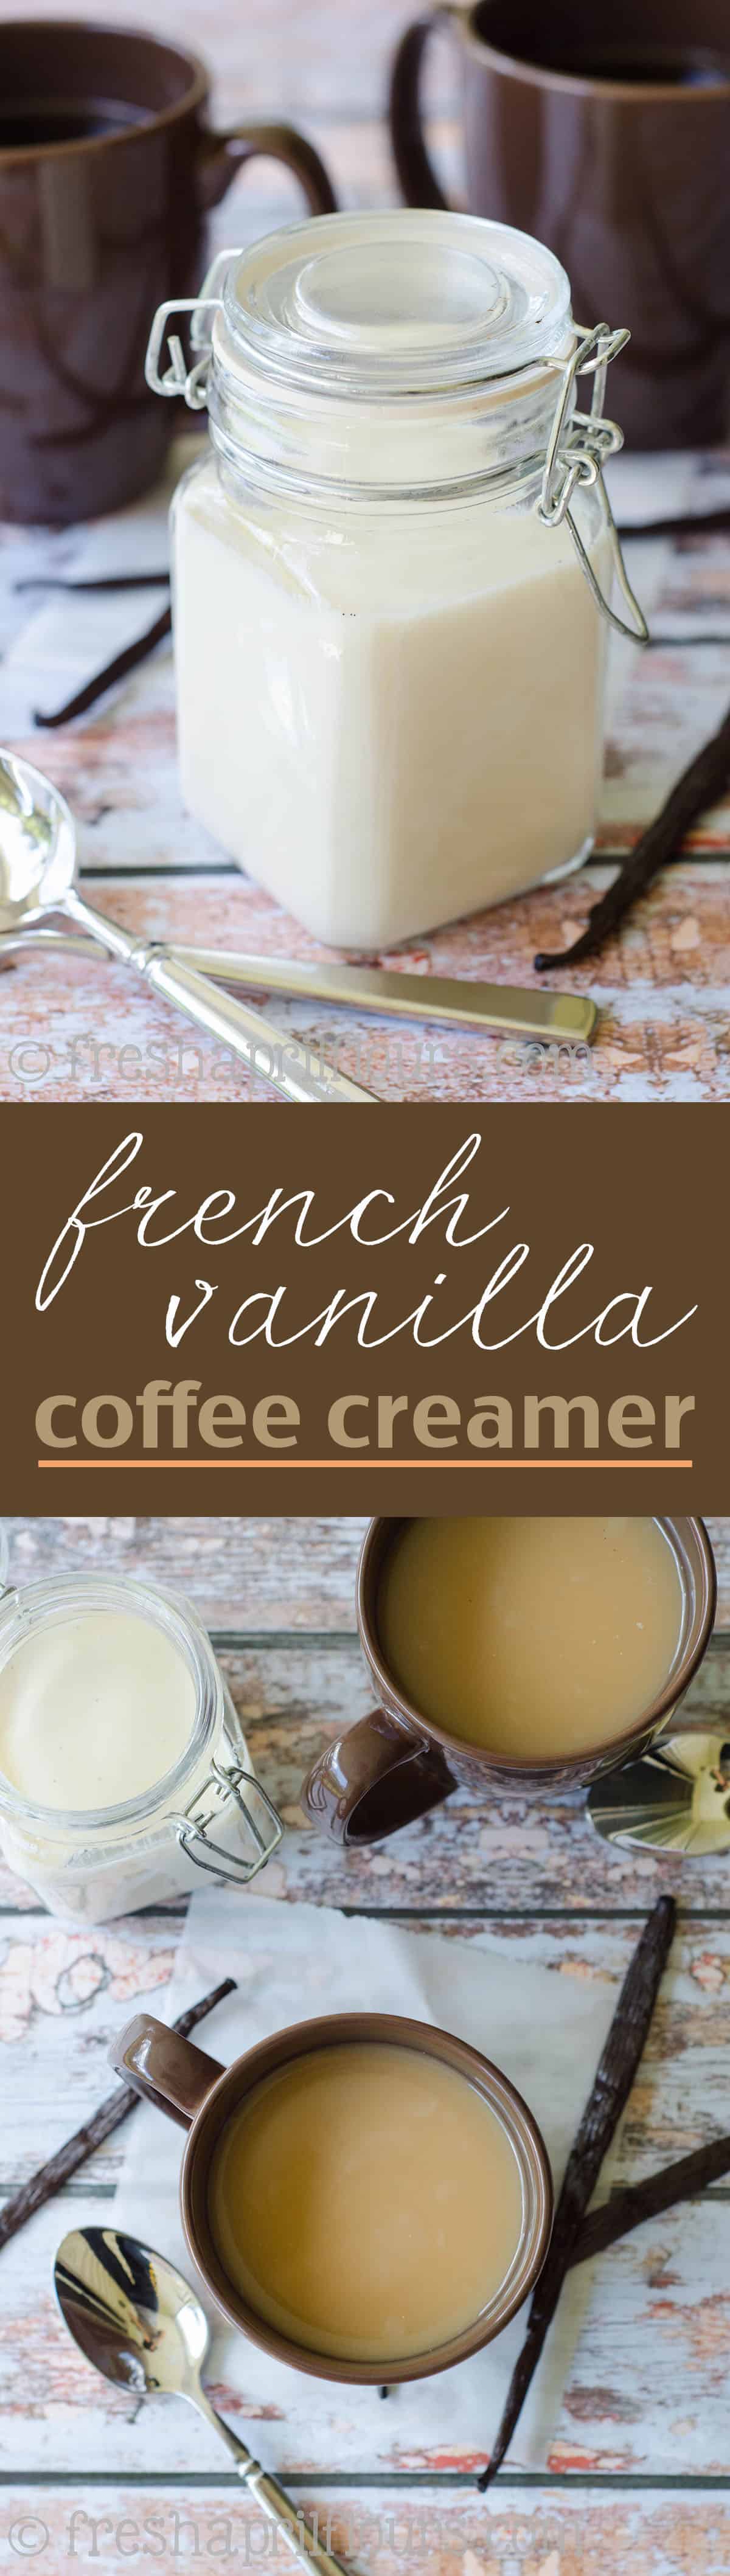 You only need 3 ingredients for this all-natural, chemical free, and 100% homemade coffee creamer. via @frshaprilflours